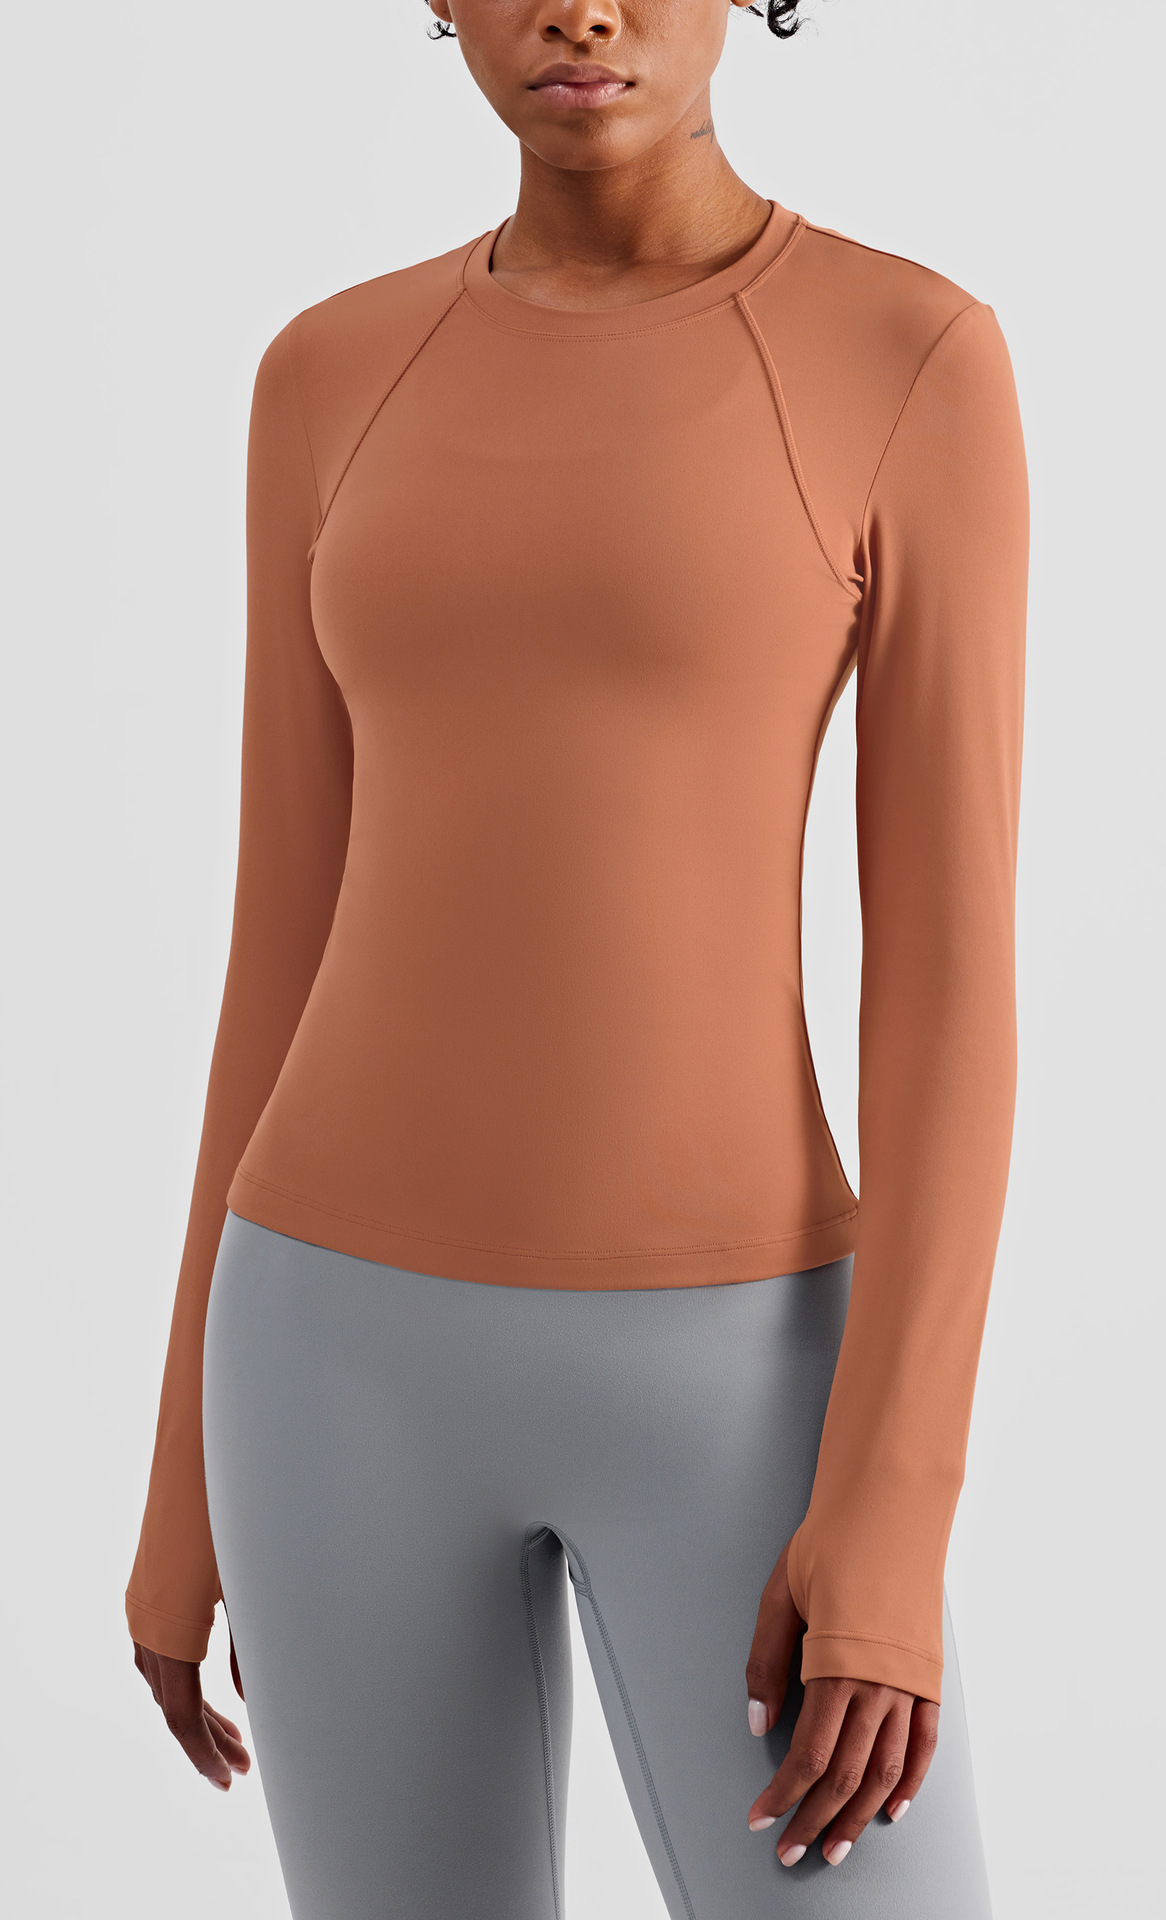 Autumn and winter fitness and yoga clothing (6)0ao